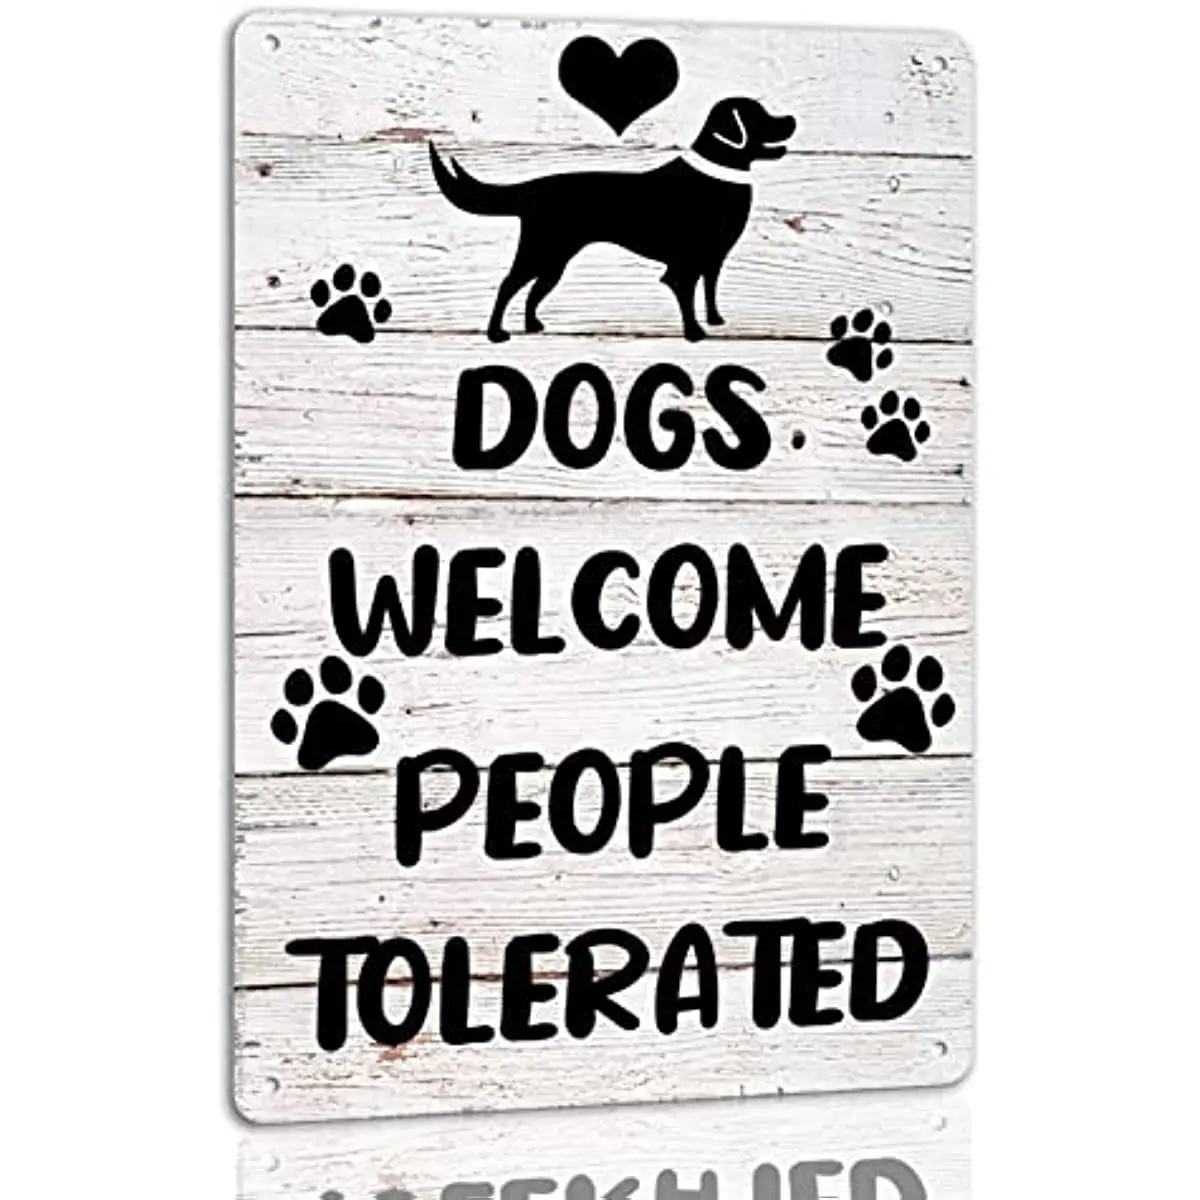 

New Dogs Welcome People Tolerated Metal Tin Sign Funny Welcome Signs Vintage Wall Decor For Bar Pub Club